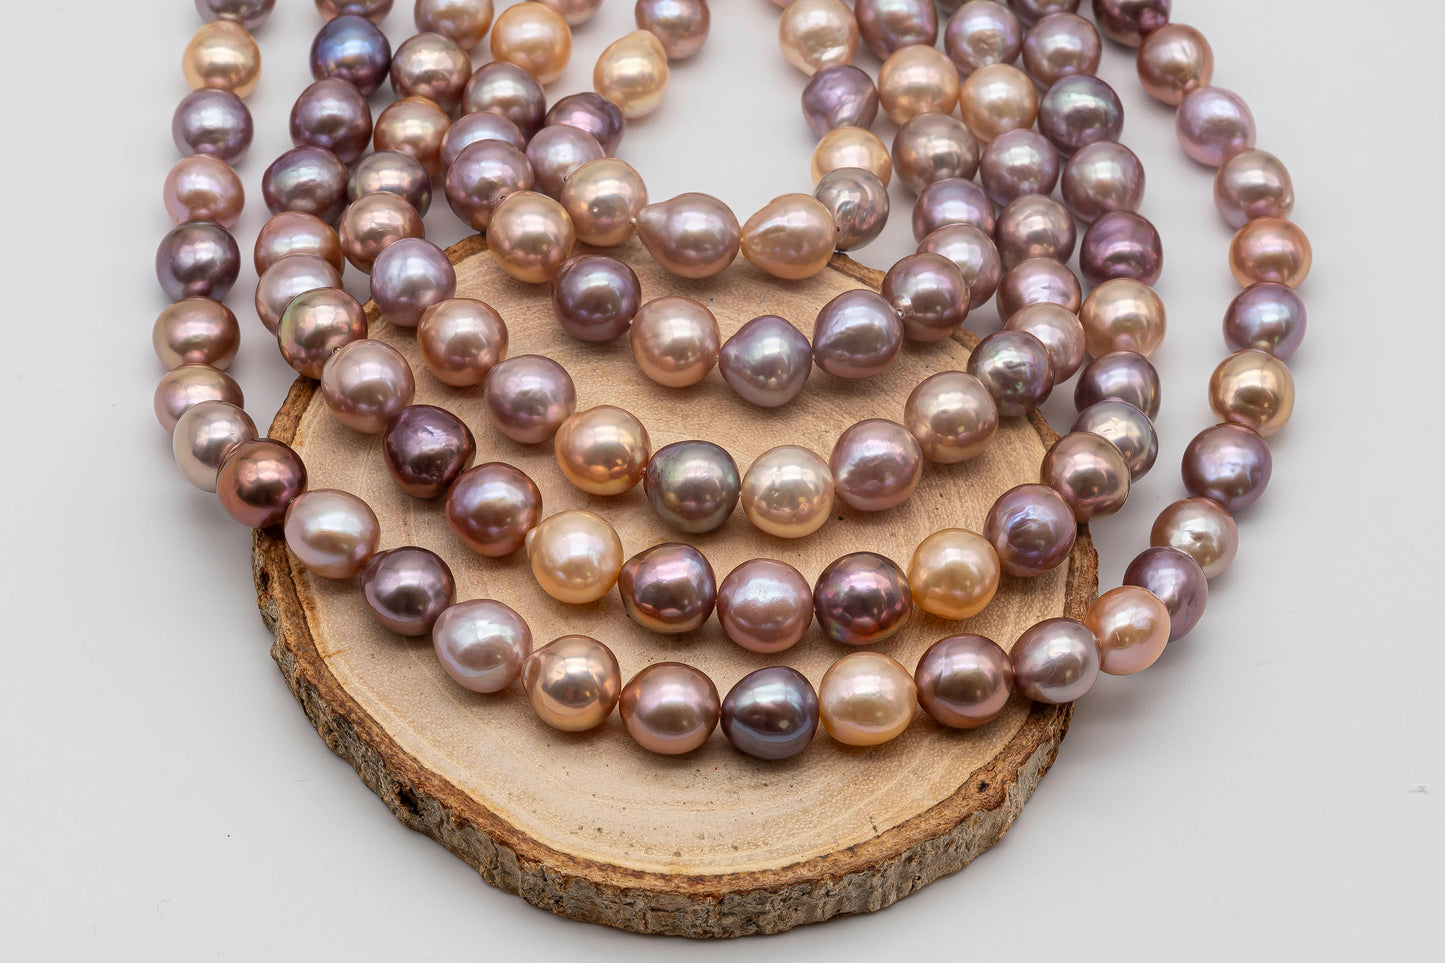 8-12mm Edison Pearl Multi-Color Near Round or Drop with Extremely Nice Luster, Natural Freshwater Pearl Bead Color, Full Strand, SKU# 1110ED